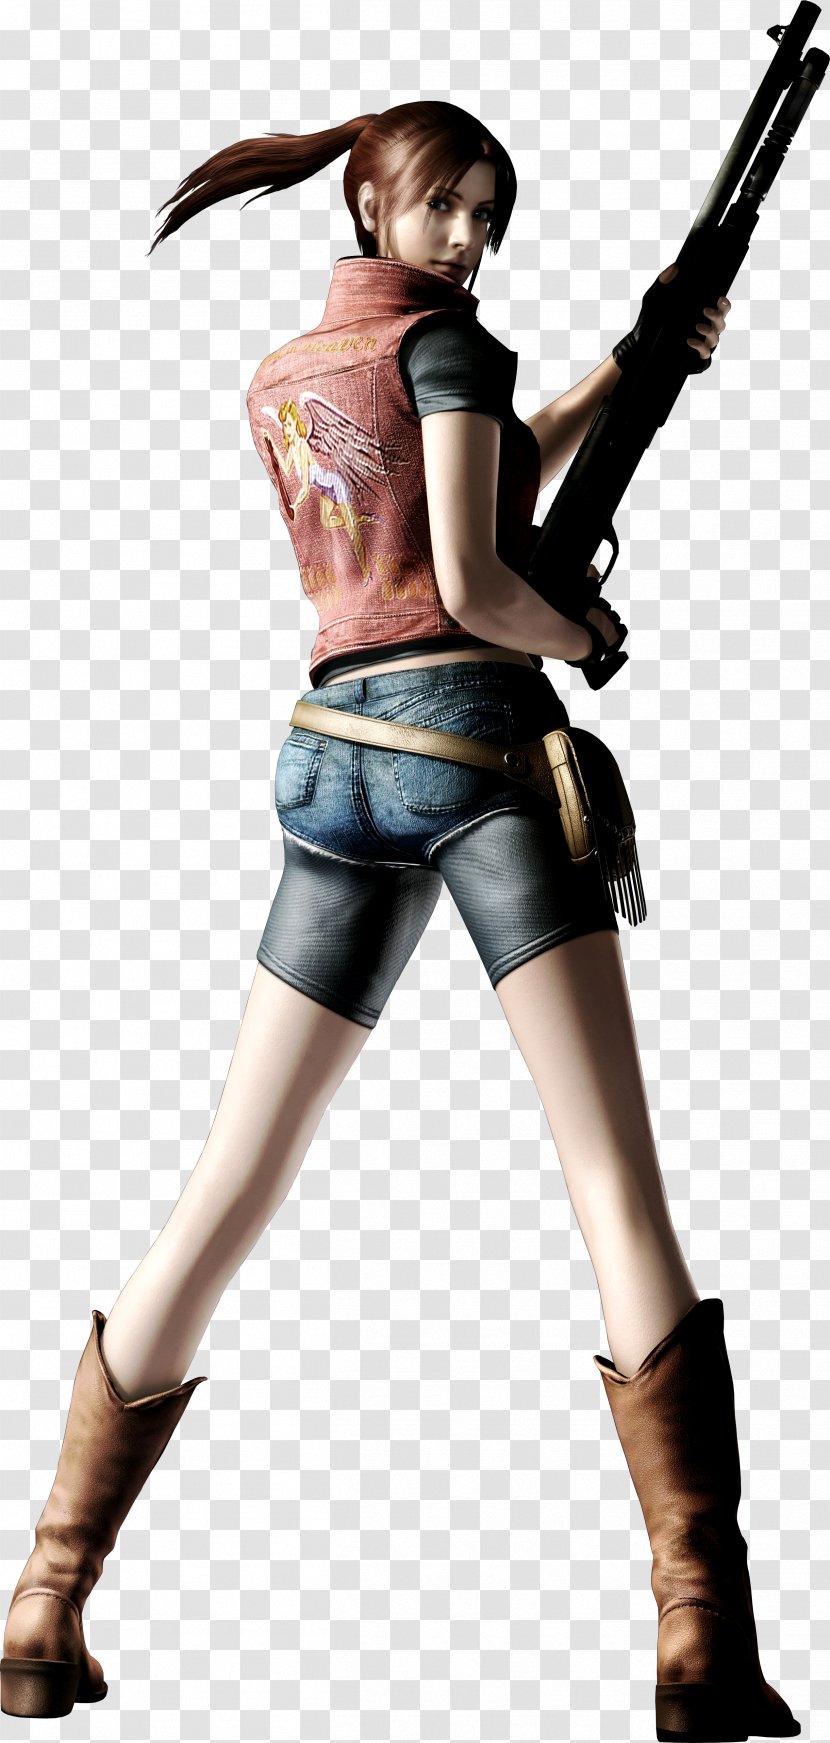 Resident Evil: Operation Raccoon City Evil 2 4 Claire Redfield - Joint Transparent PNG